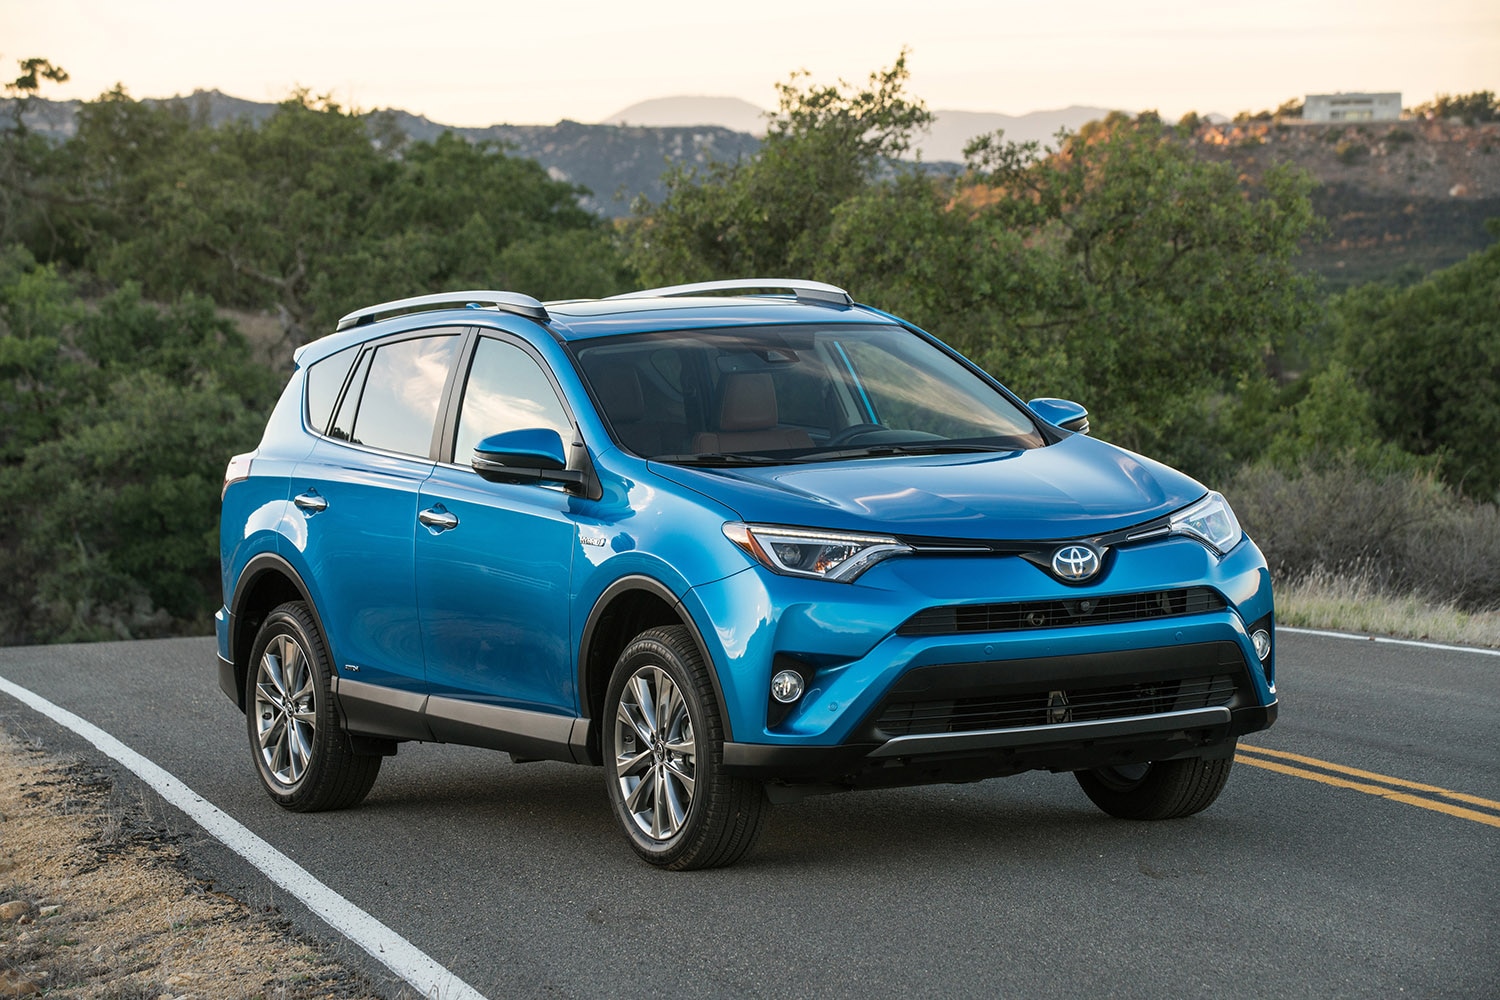 2018 Toyota RAV4 Hybrid: One of Capital One's 10 Best Road Trip Vehicles, According to Science